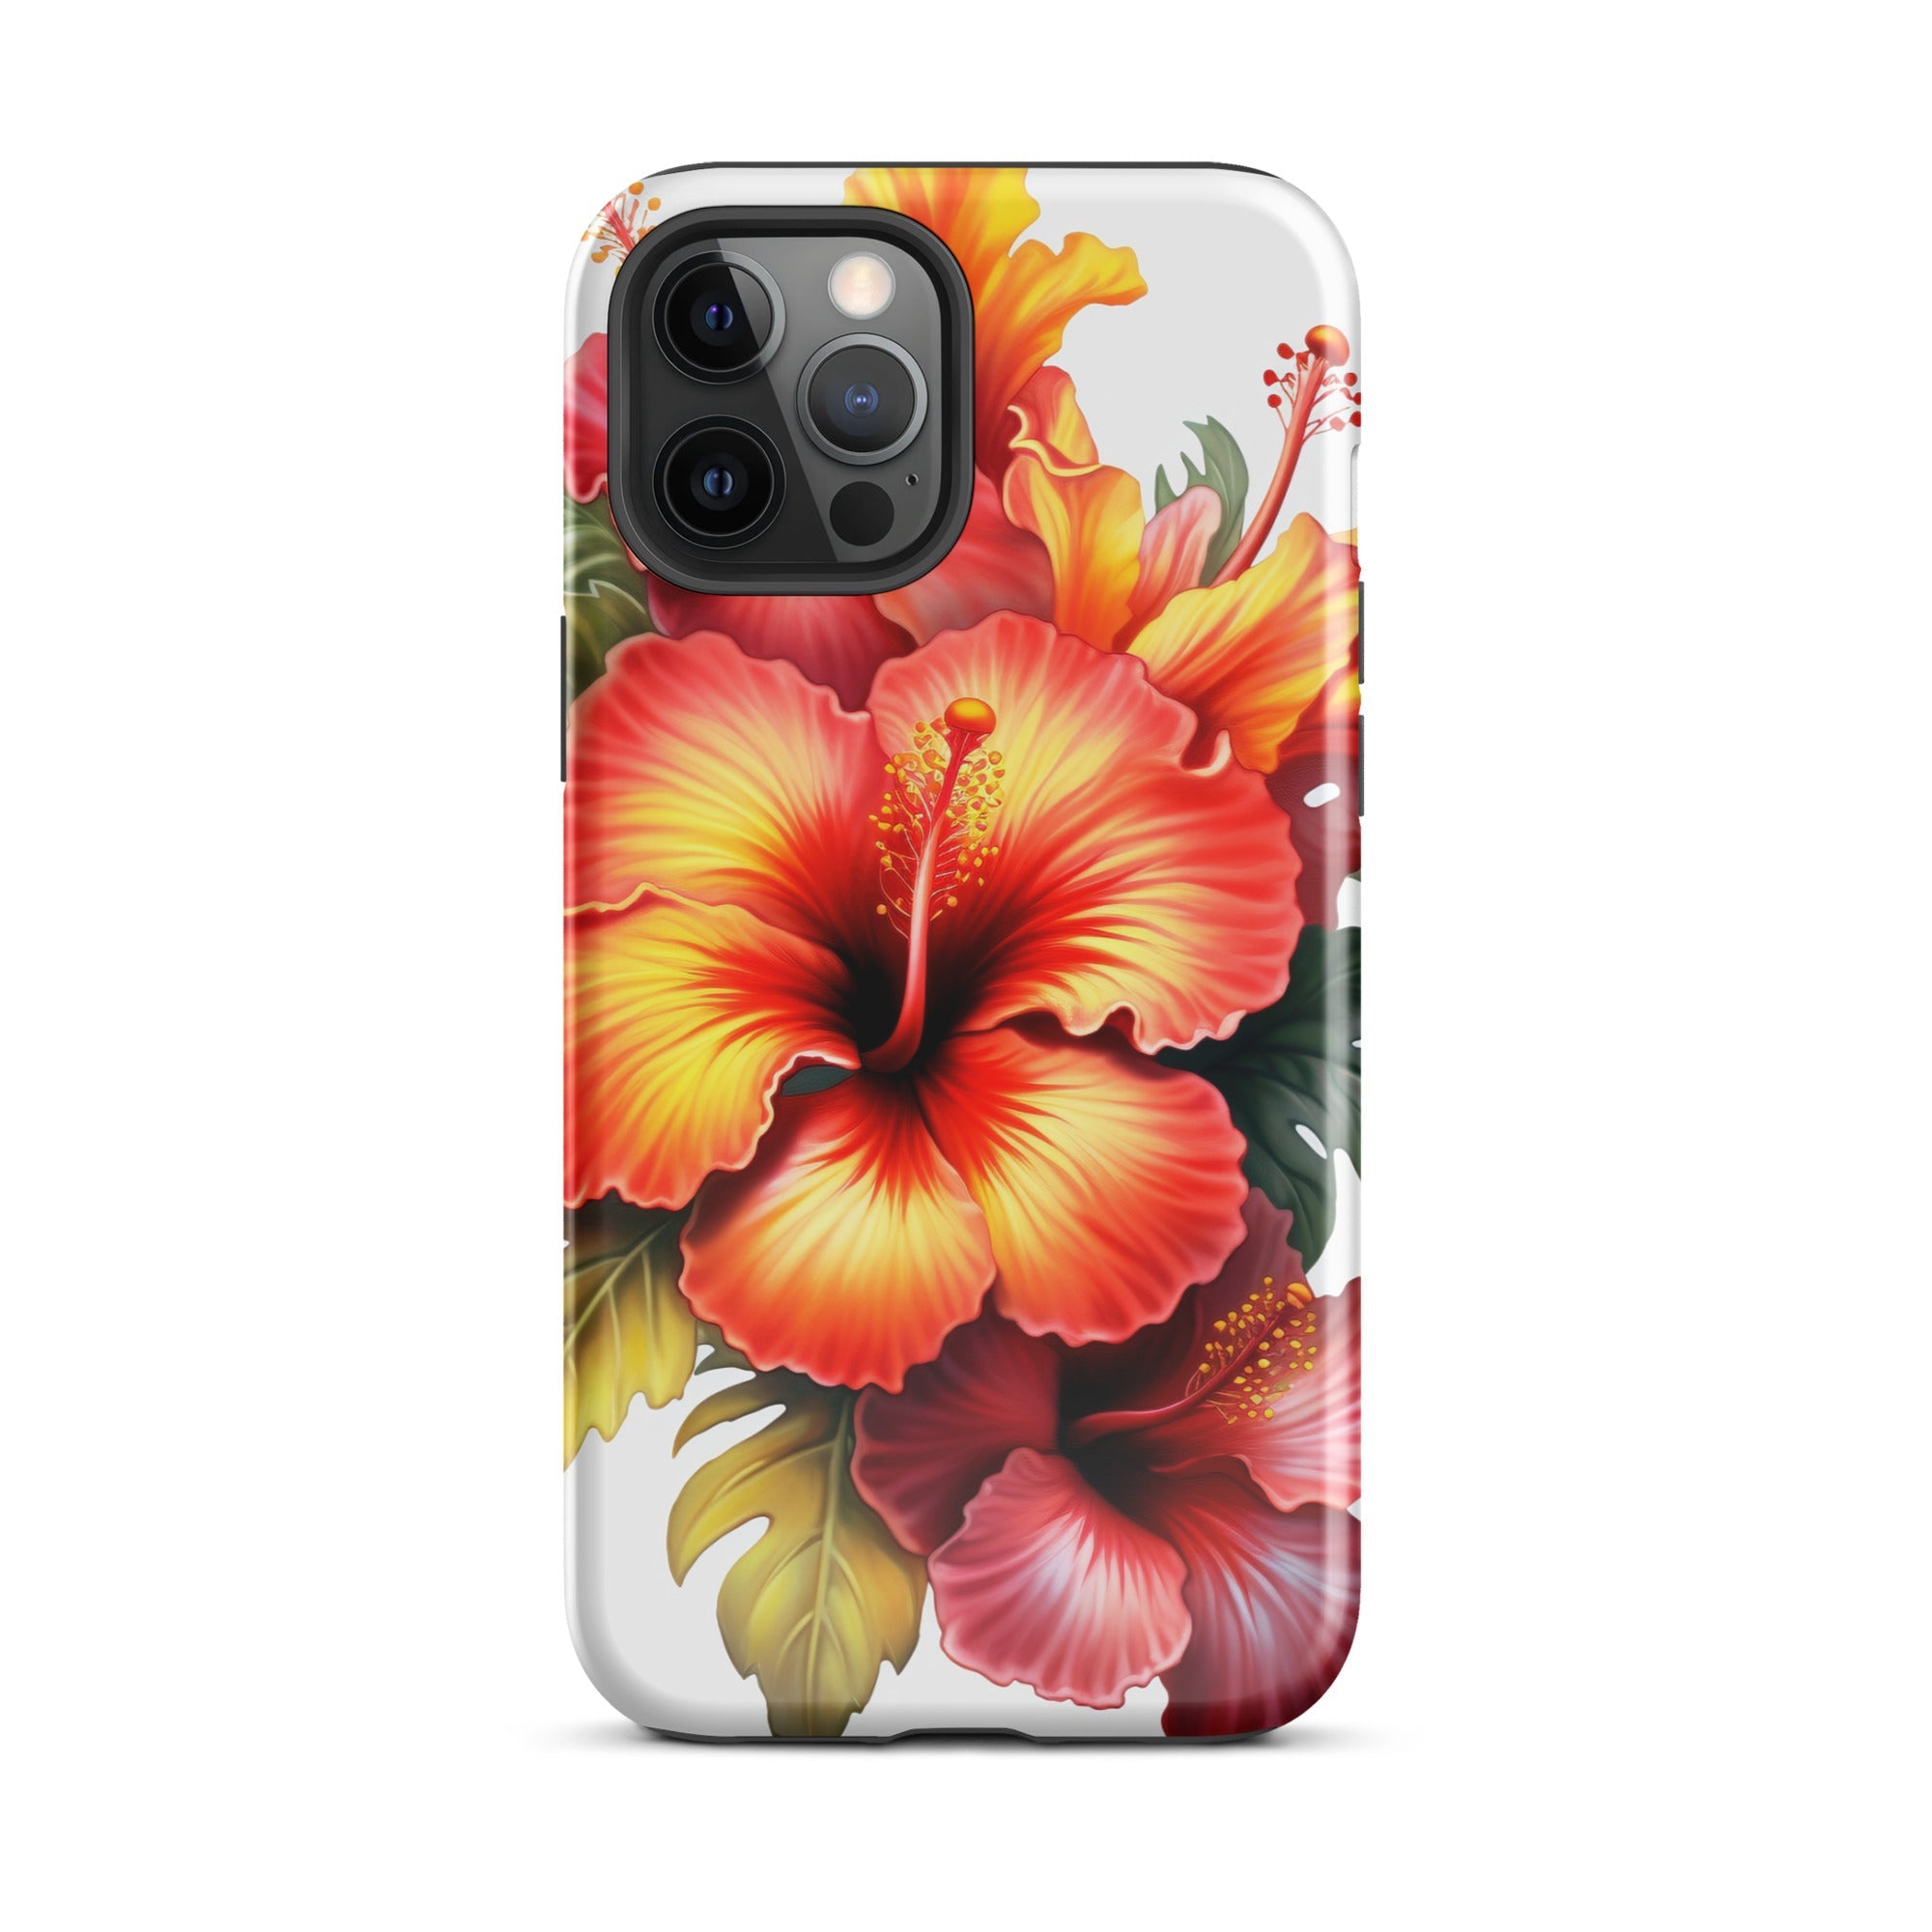 Hibiscus Flower iPhone Case by Visual Verse - Image 13